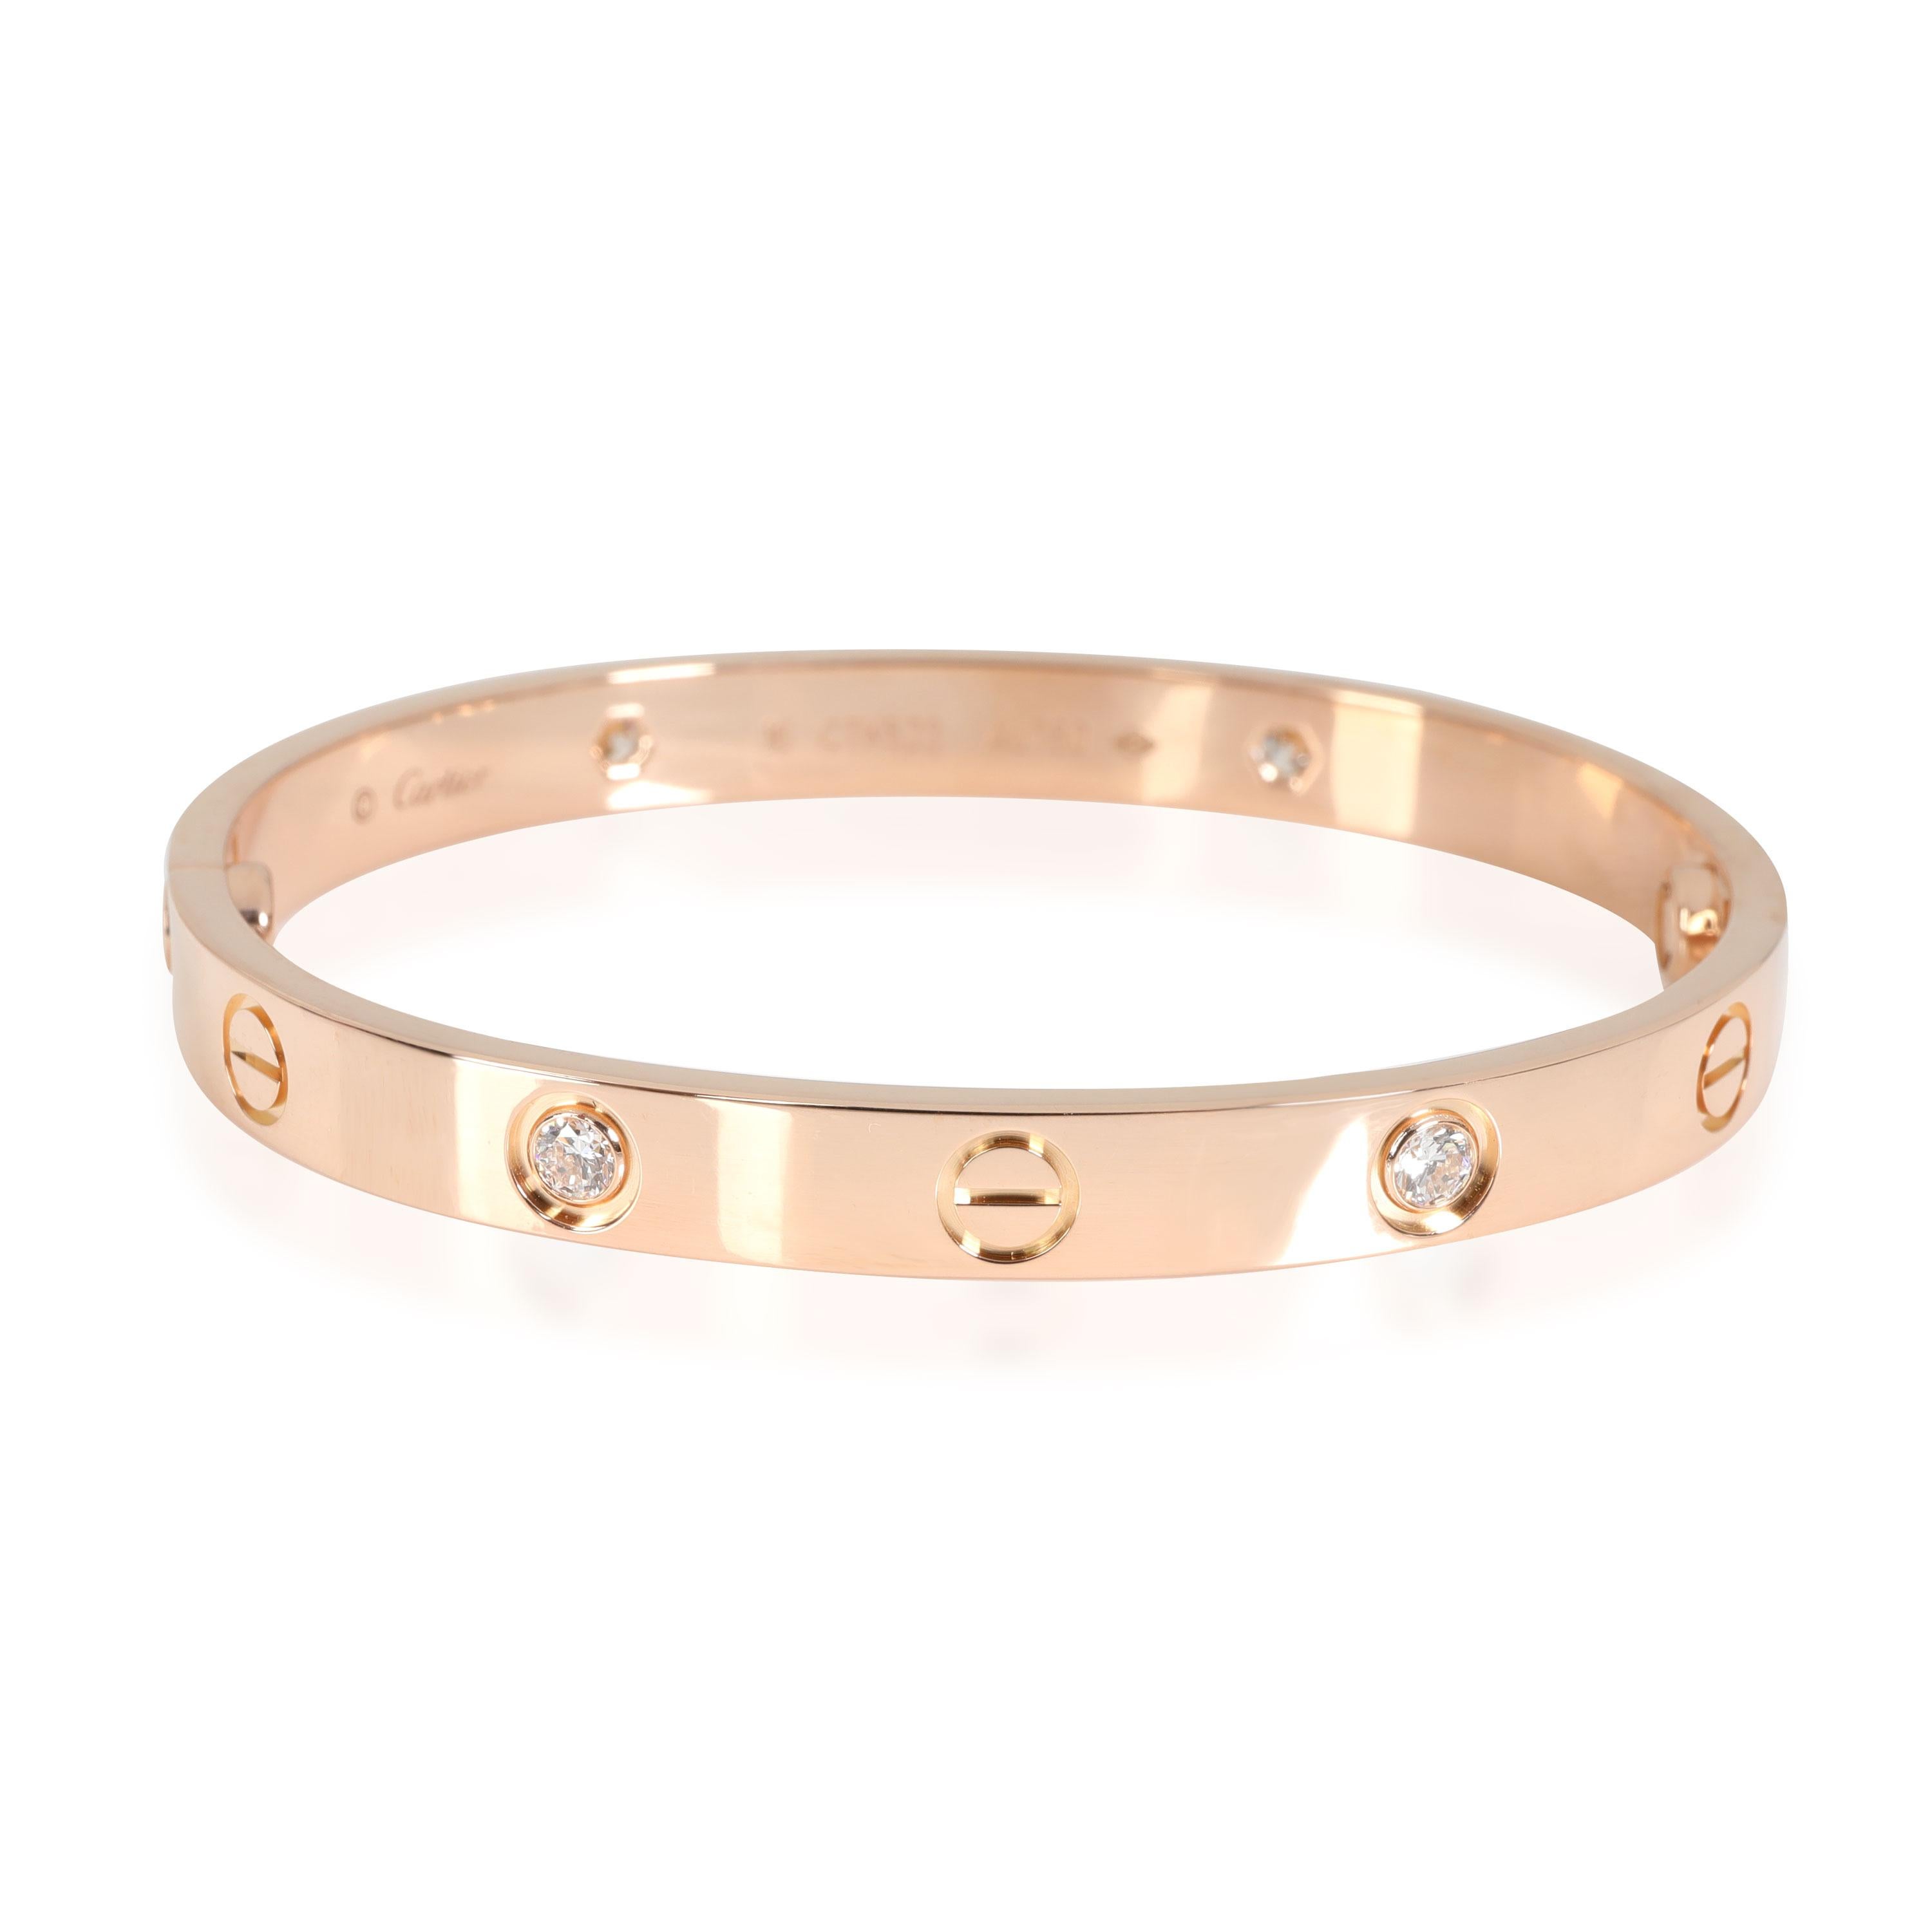 Cartier LOVE Diamond Bracelet in 18K Rose Gold 0.42 CTW

PRIMARY DETAILS
SKU: 115407
Listing Title: Cartier LOVE Diamond Bracelet in 18K Rose Gold 0.42 CTW
Condition Description: Retails for 11100 USD. In excellent condition and recently polished.